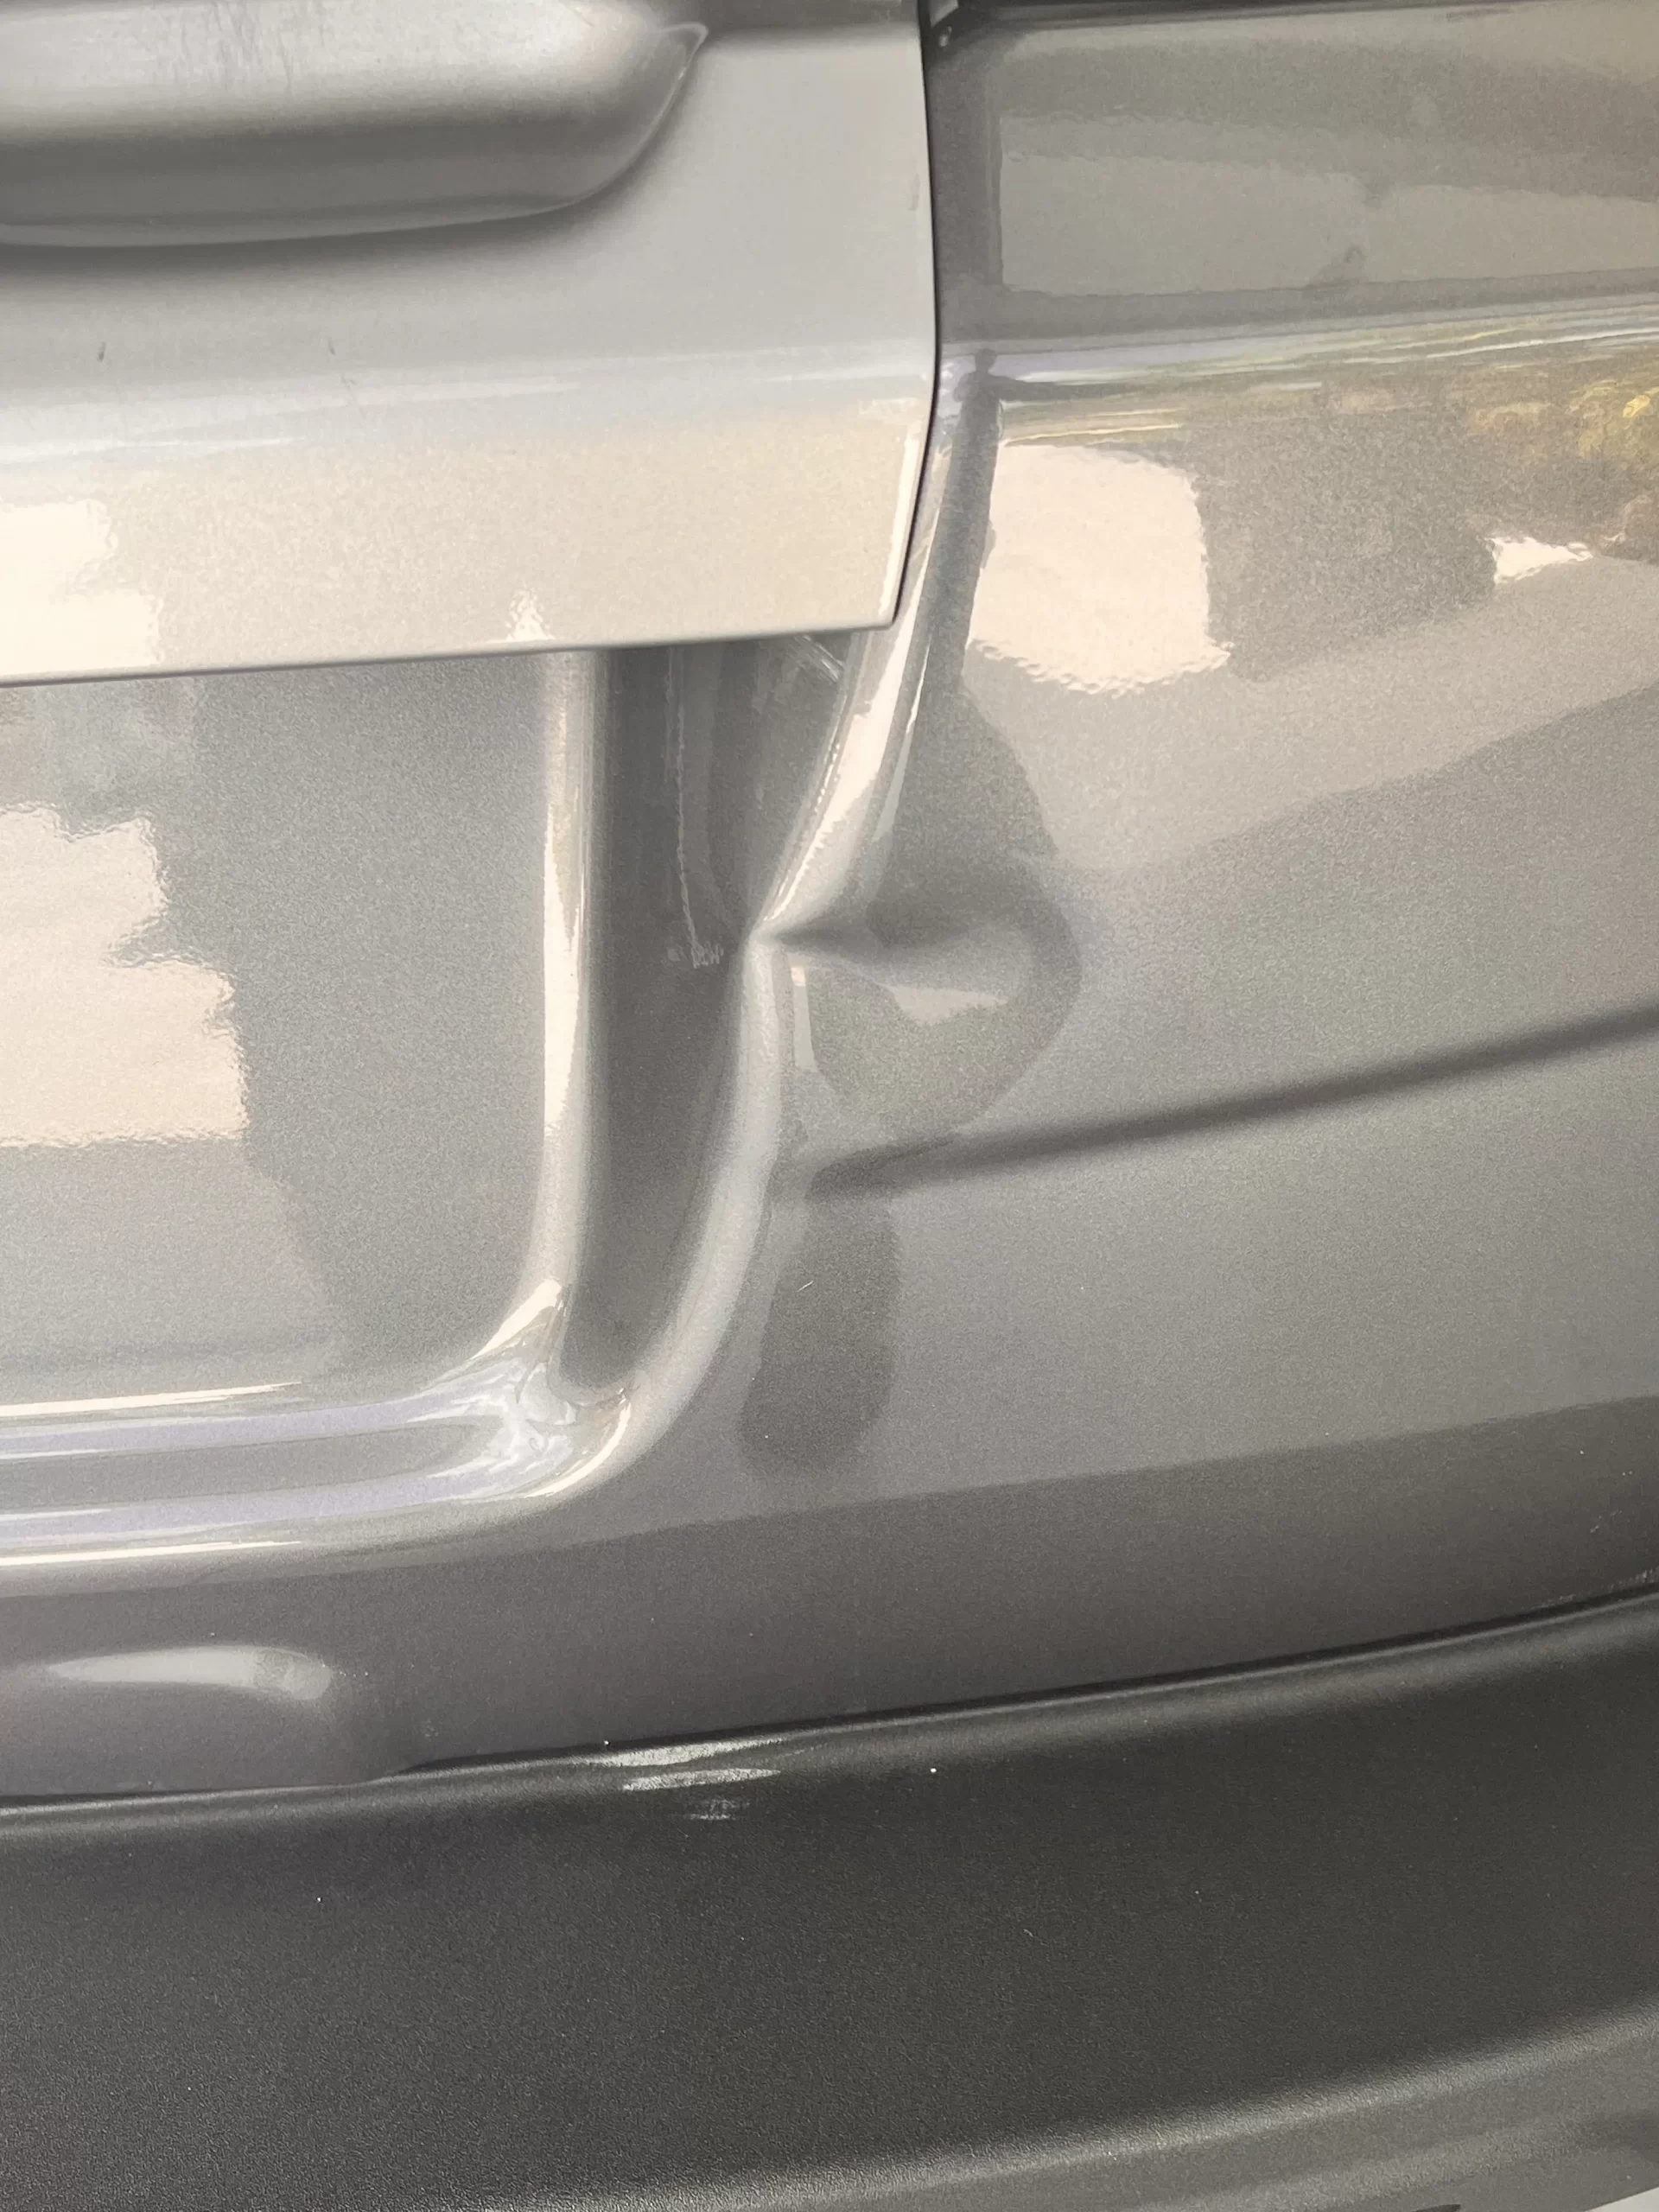 The slightly dented back portion of a grey vehicle prior to repairs.